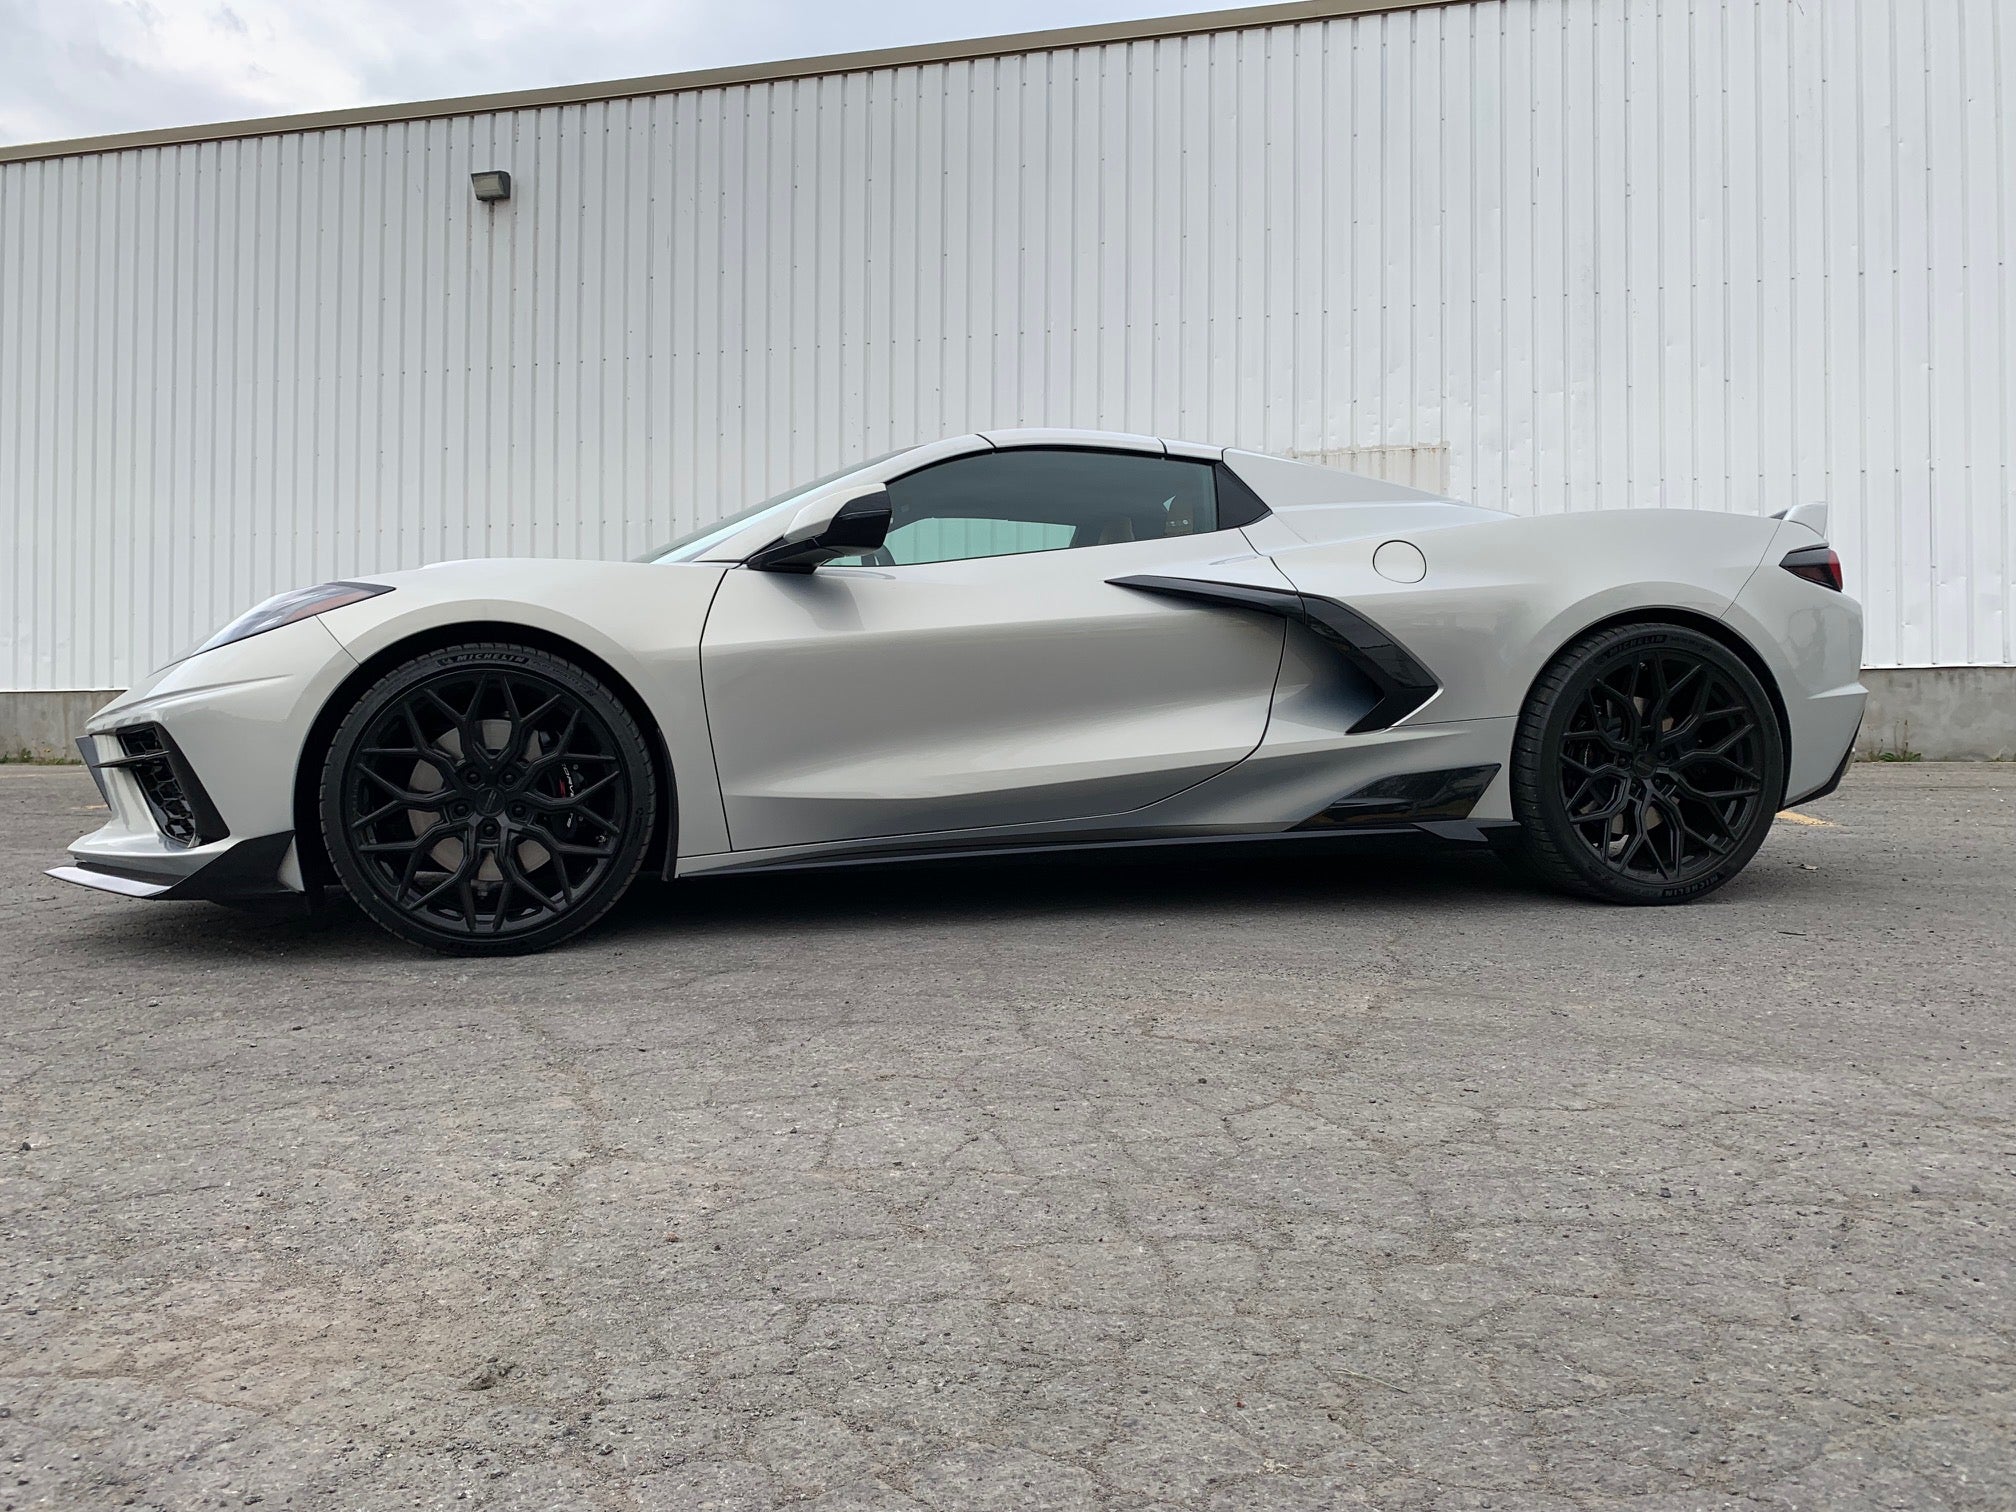 Hypersonic Gray C8 Corvette with the ACS 7VM Front Splitter and Side Rockers in Carbon Flash Metallic Black